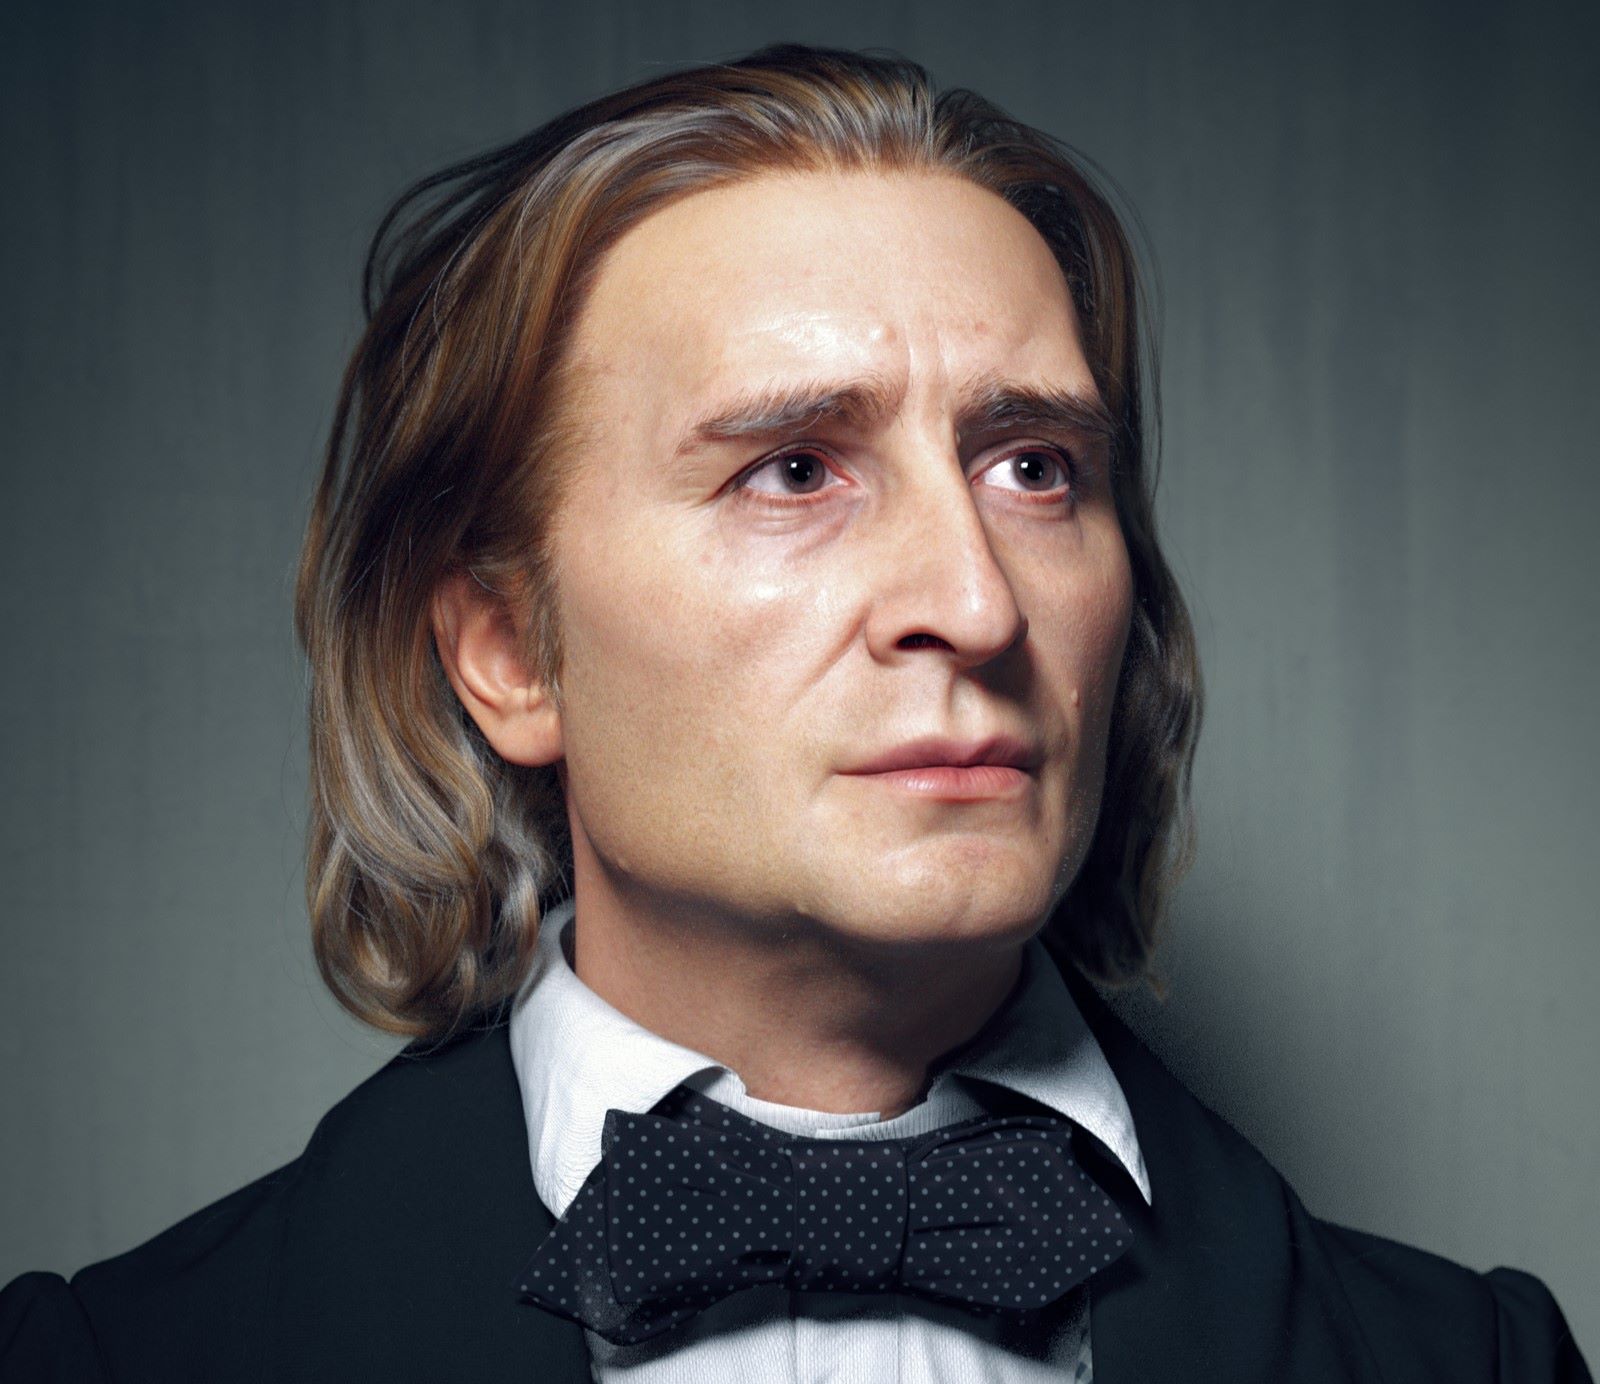 What Musician Awed Liszt At Age 19 And Inspired Him To Practice 8 To 12 Hours A Day